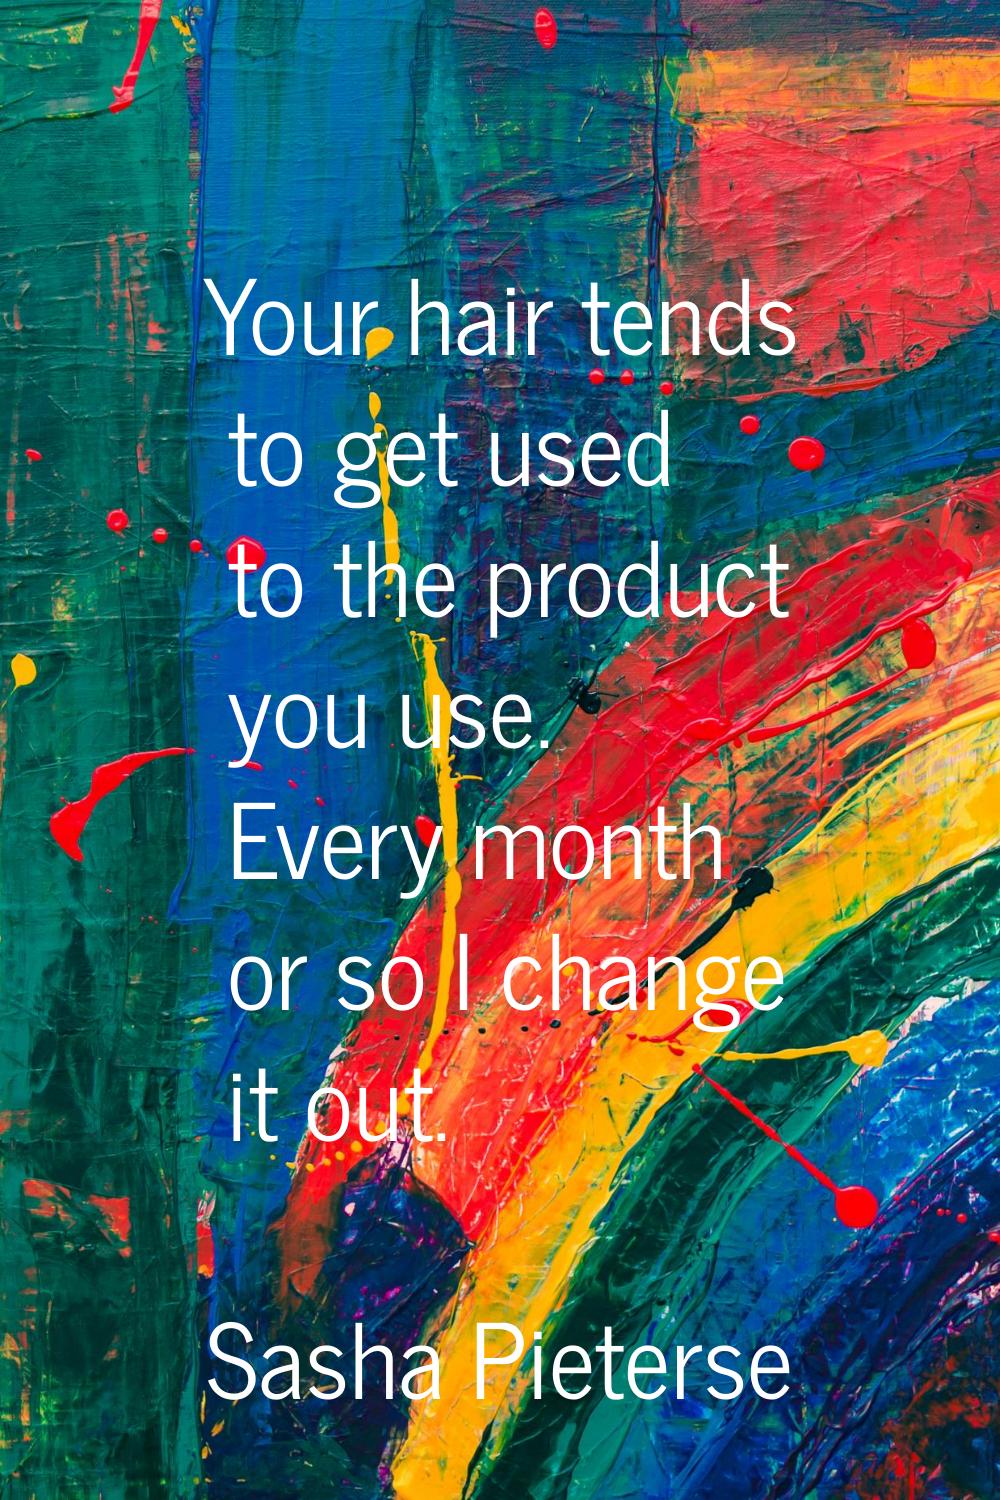 Your hair tends to get used to the product you use. Every month or so I change it out.